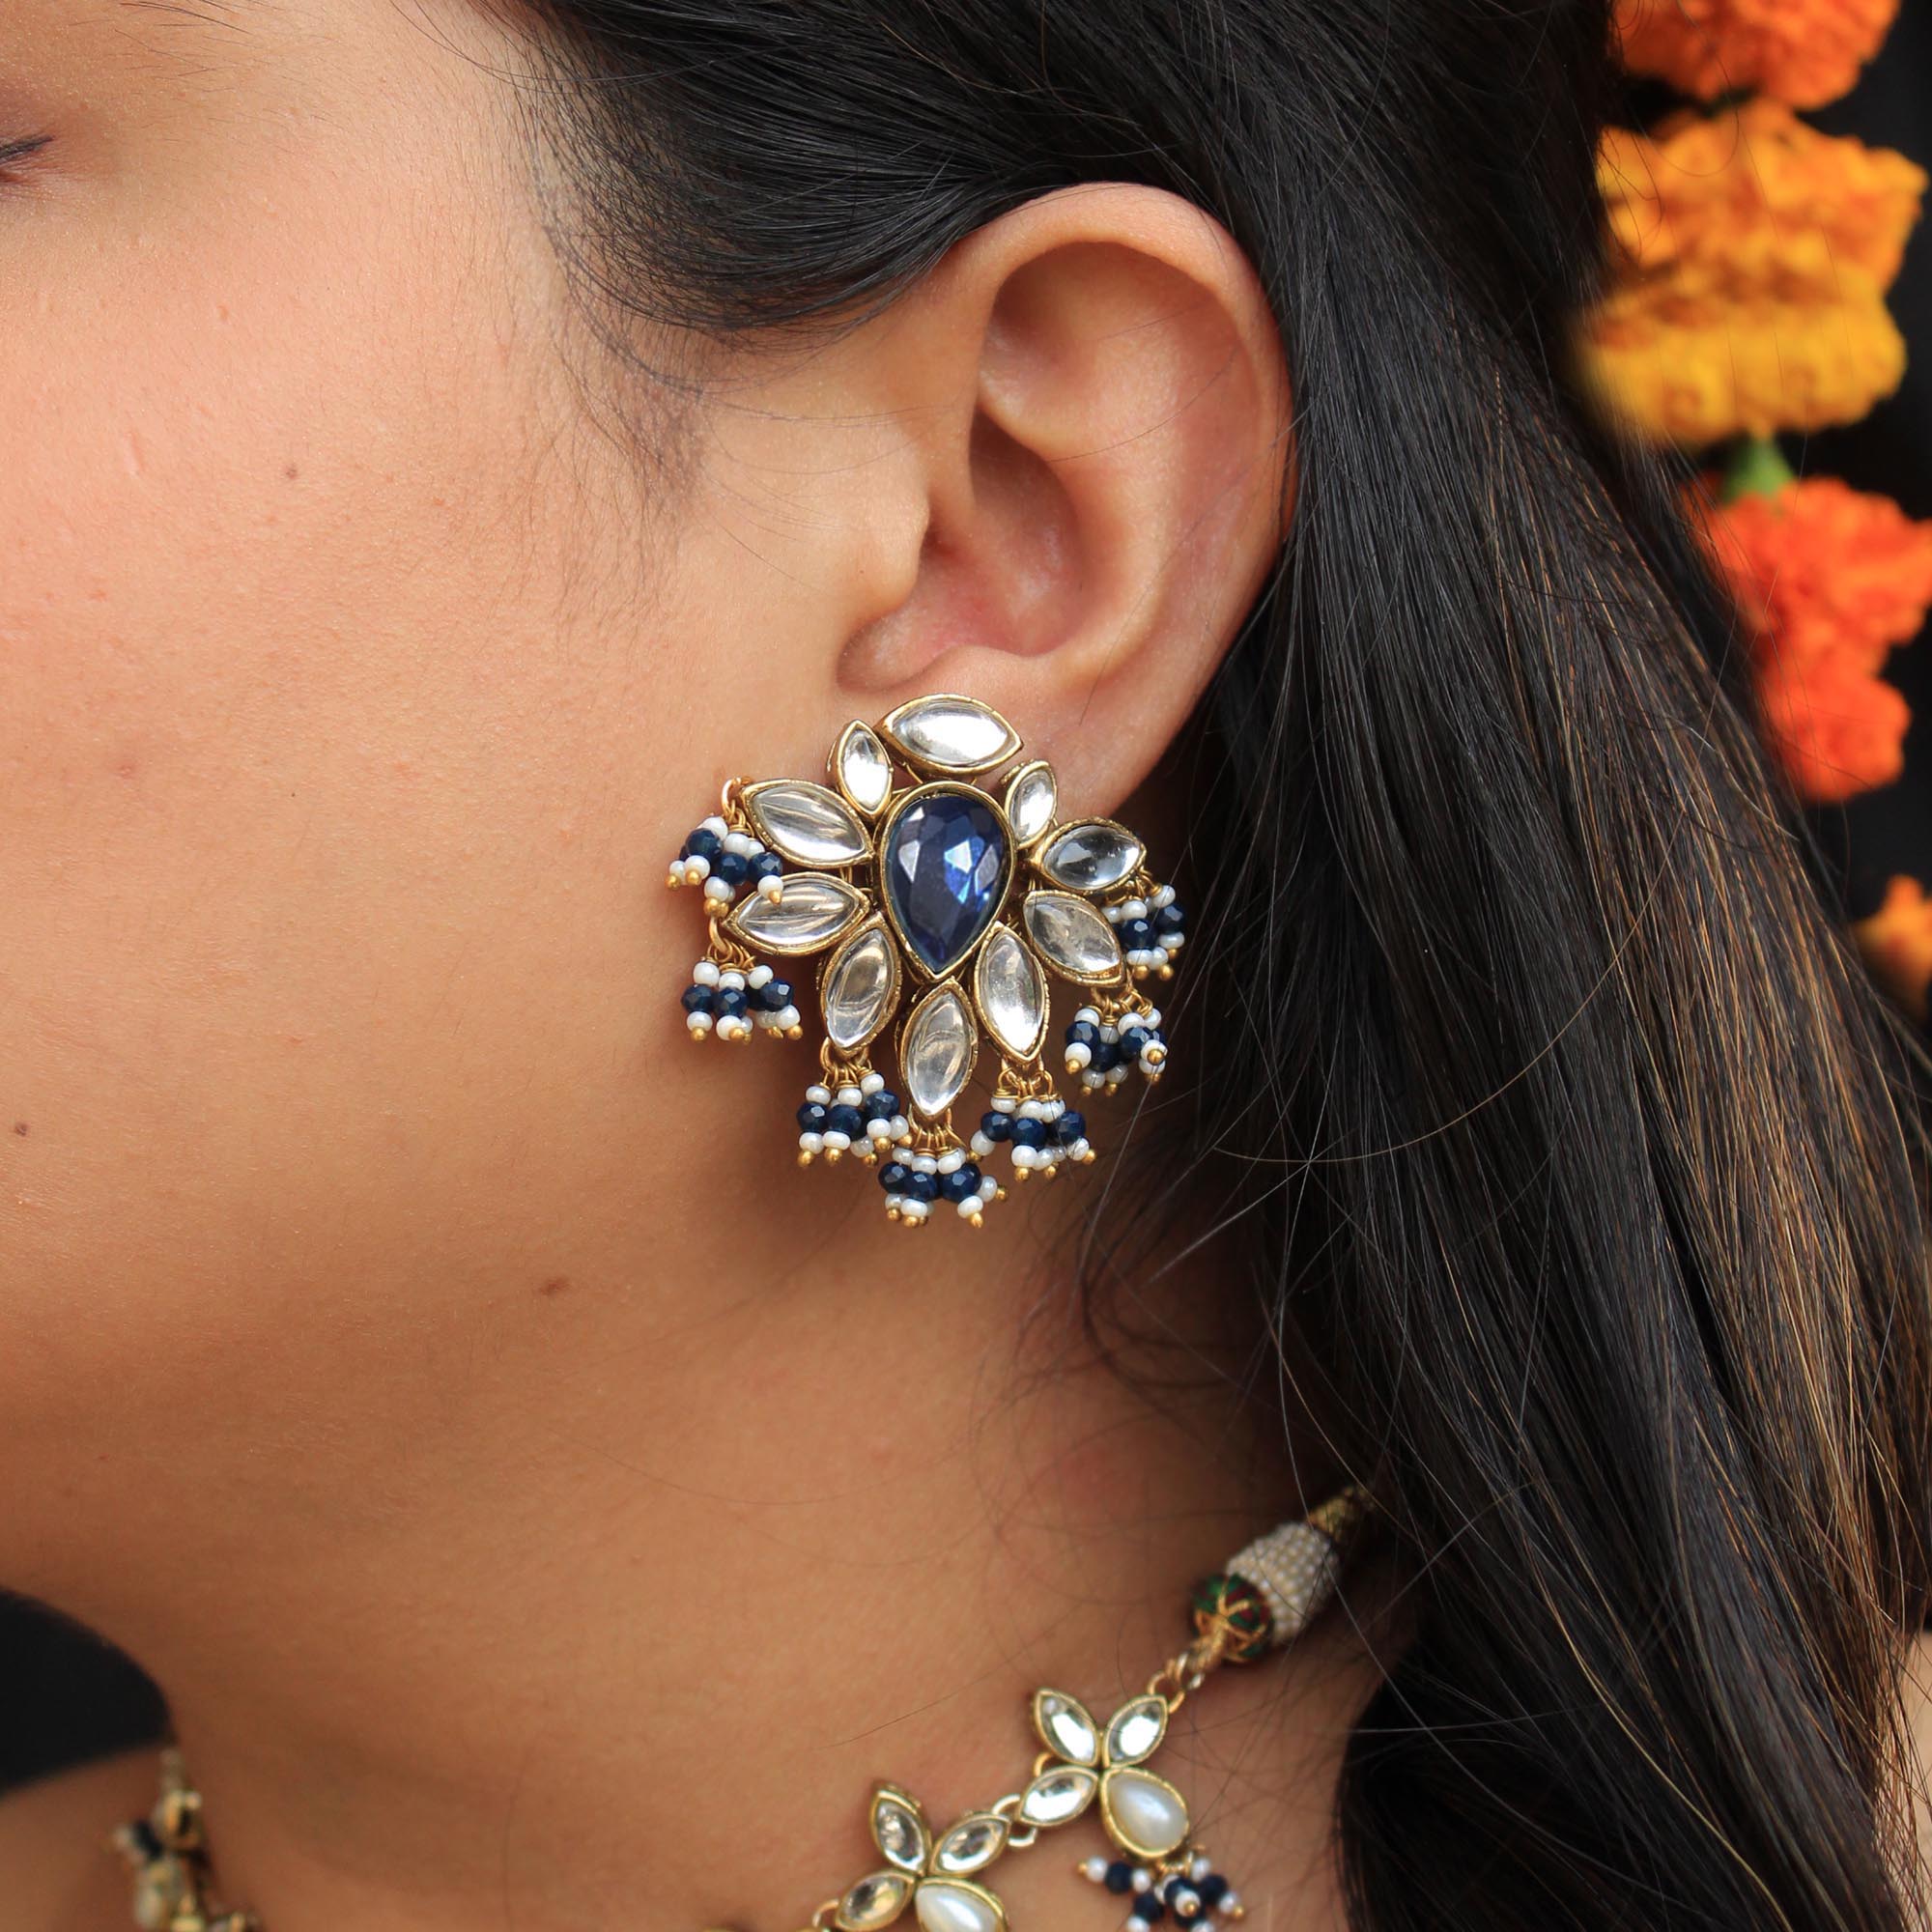 Beabhika Handmade Artificial Jewelry Blue Kundan Earrings Blue Color Beads Heavy Kundan Earrings Available On COD In India Traditional Heeramandi Style Jewelry Stylish Ethnic Dress Matching Earrings Handmade Fashion Statement Earrigns Matching With Suit Saree Frok Skirt Dress Party Wear